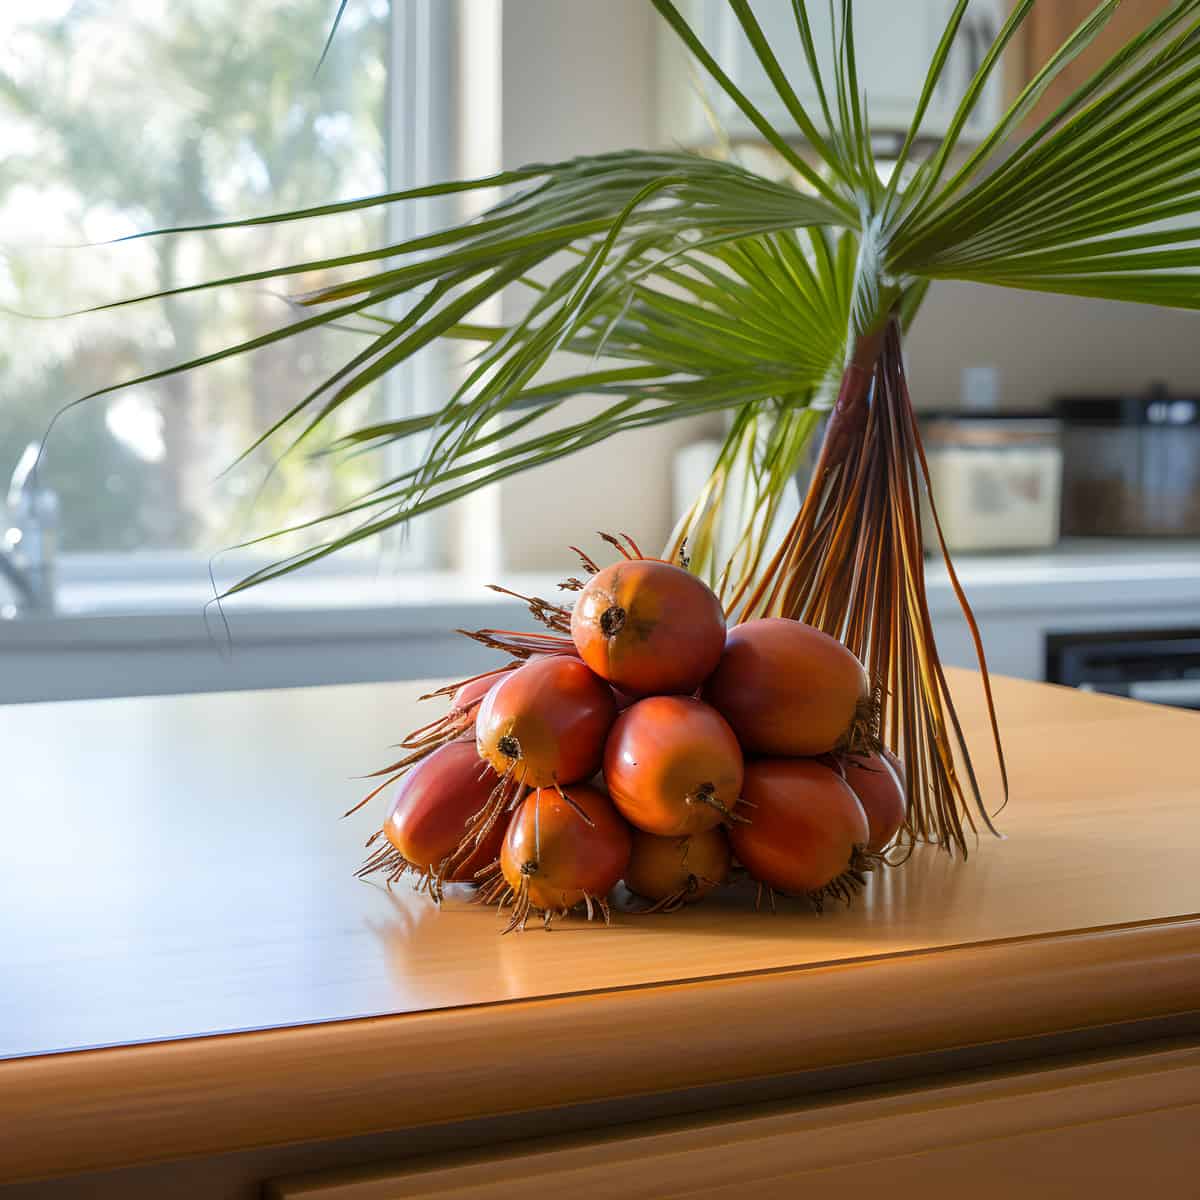 Queen Palm Fruit on a kitchen counter